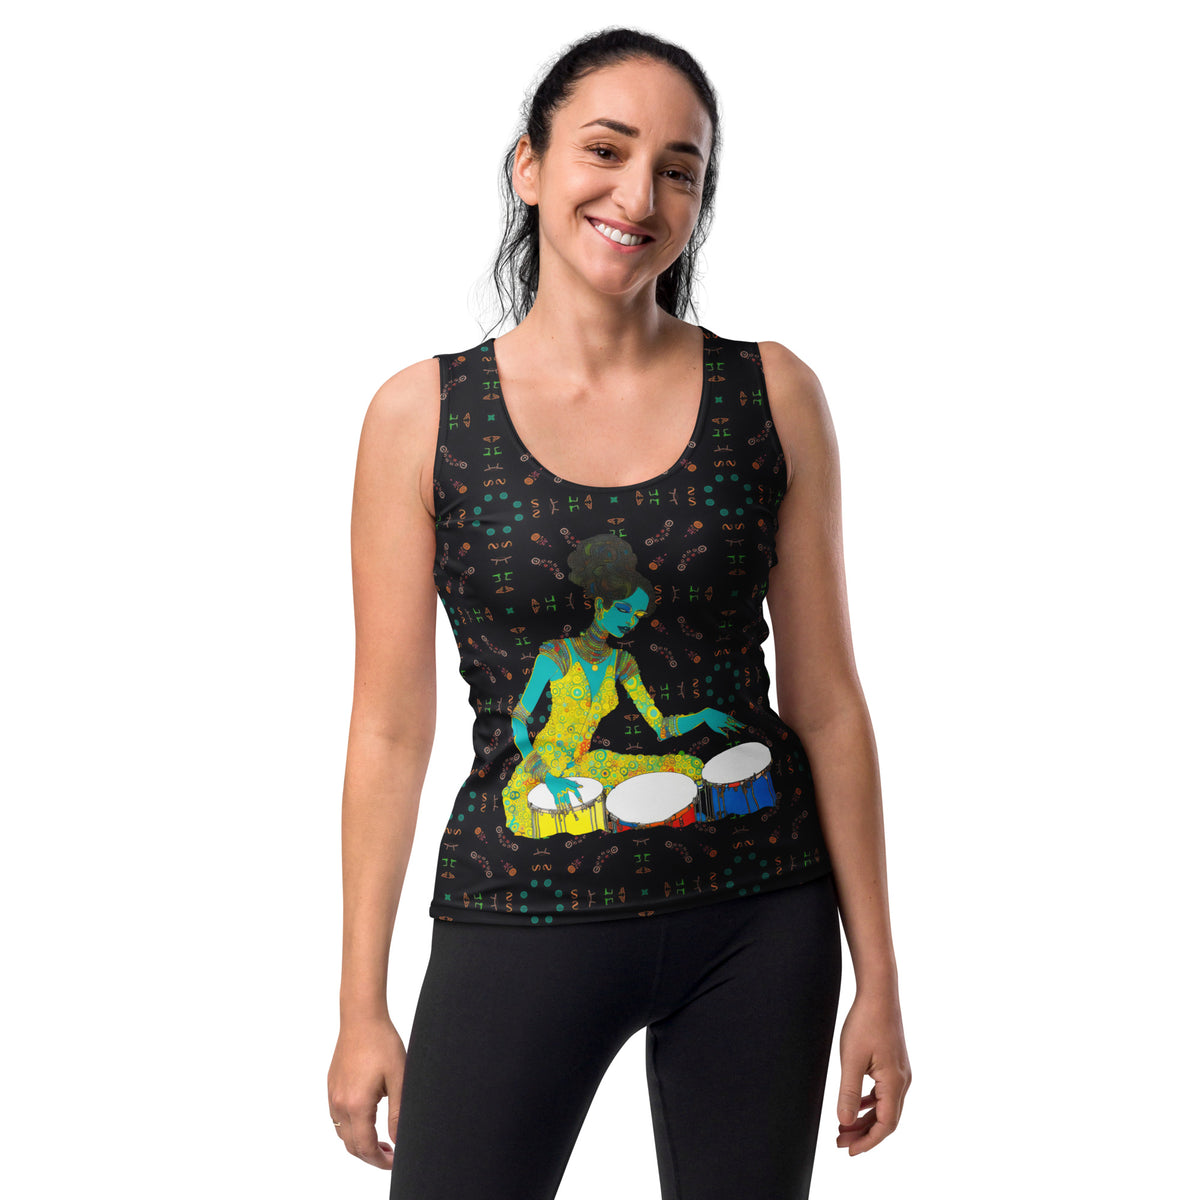 Wildflowers Wanderlust Women's Tank Top on a clothing mannequin.